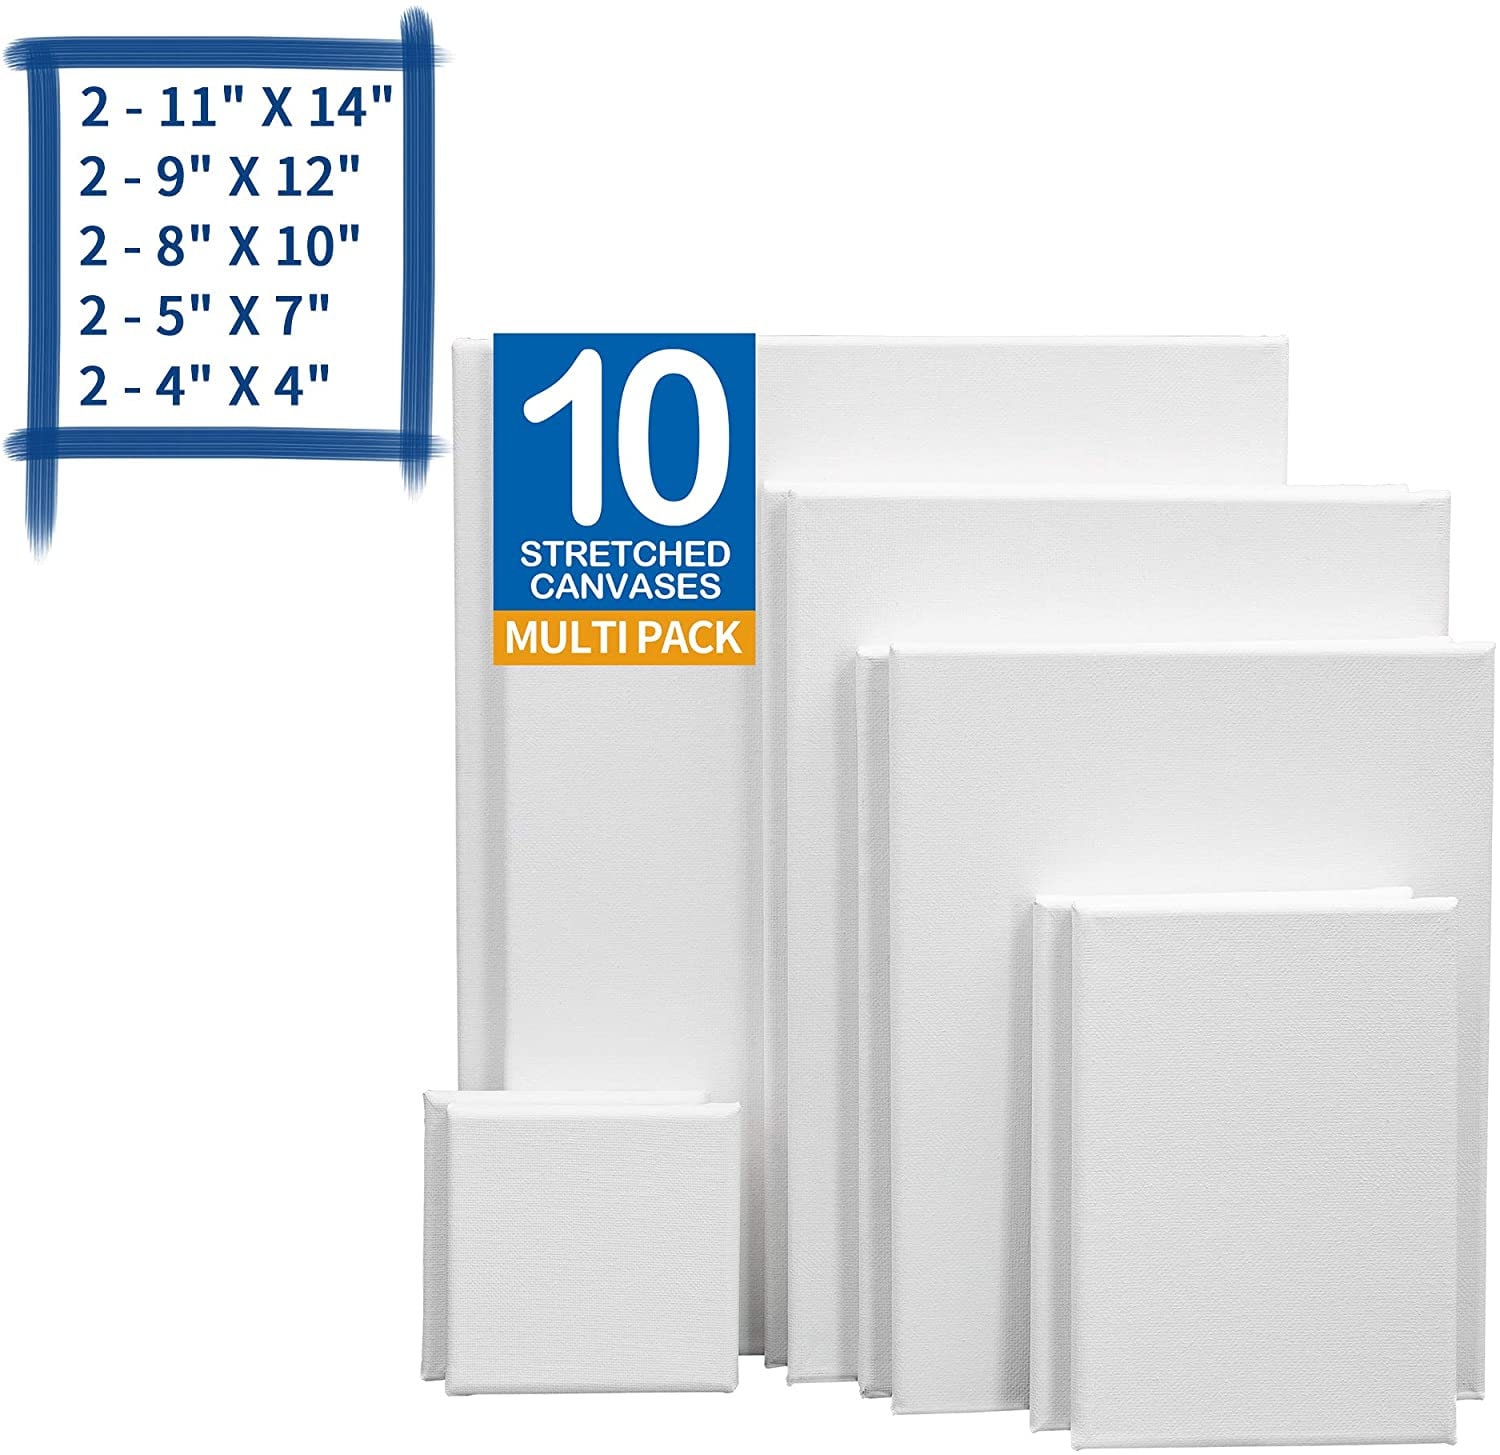 Stretched Canvas Multi Pack 4X4 5X7 8X10 9X12 11X14 Set Of